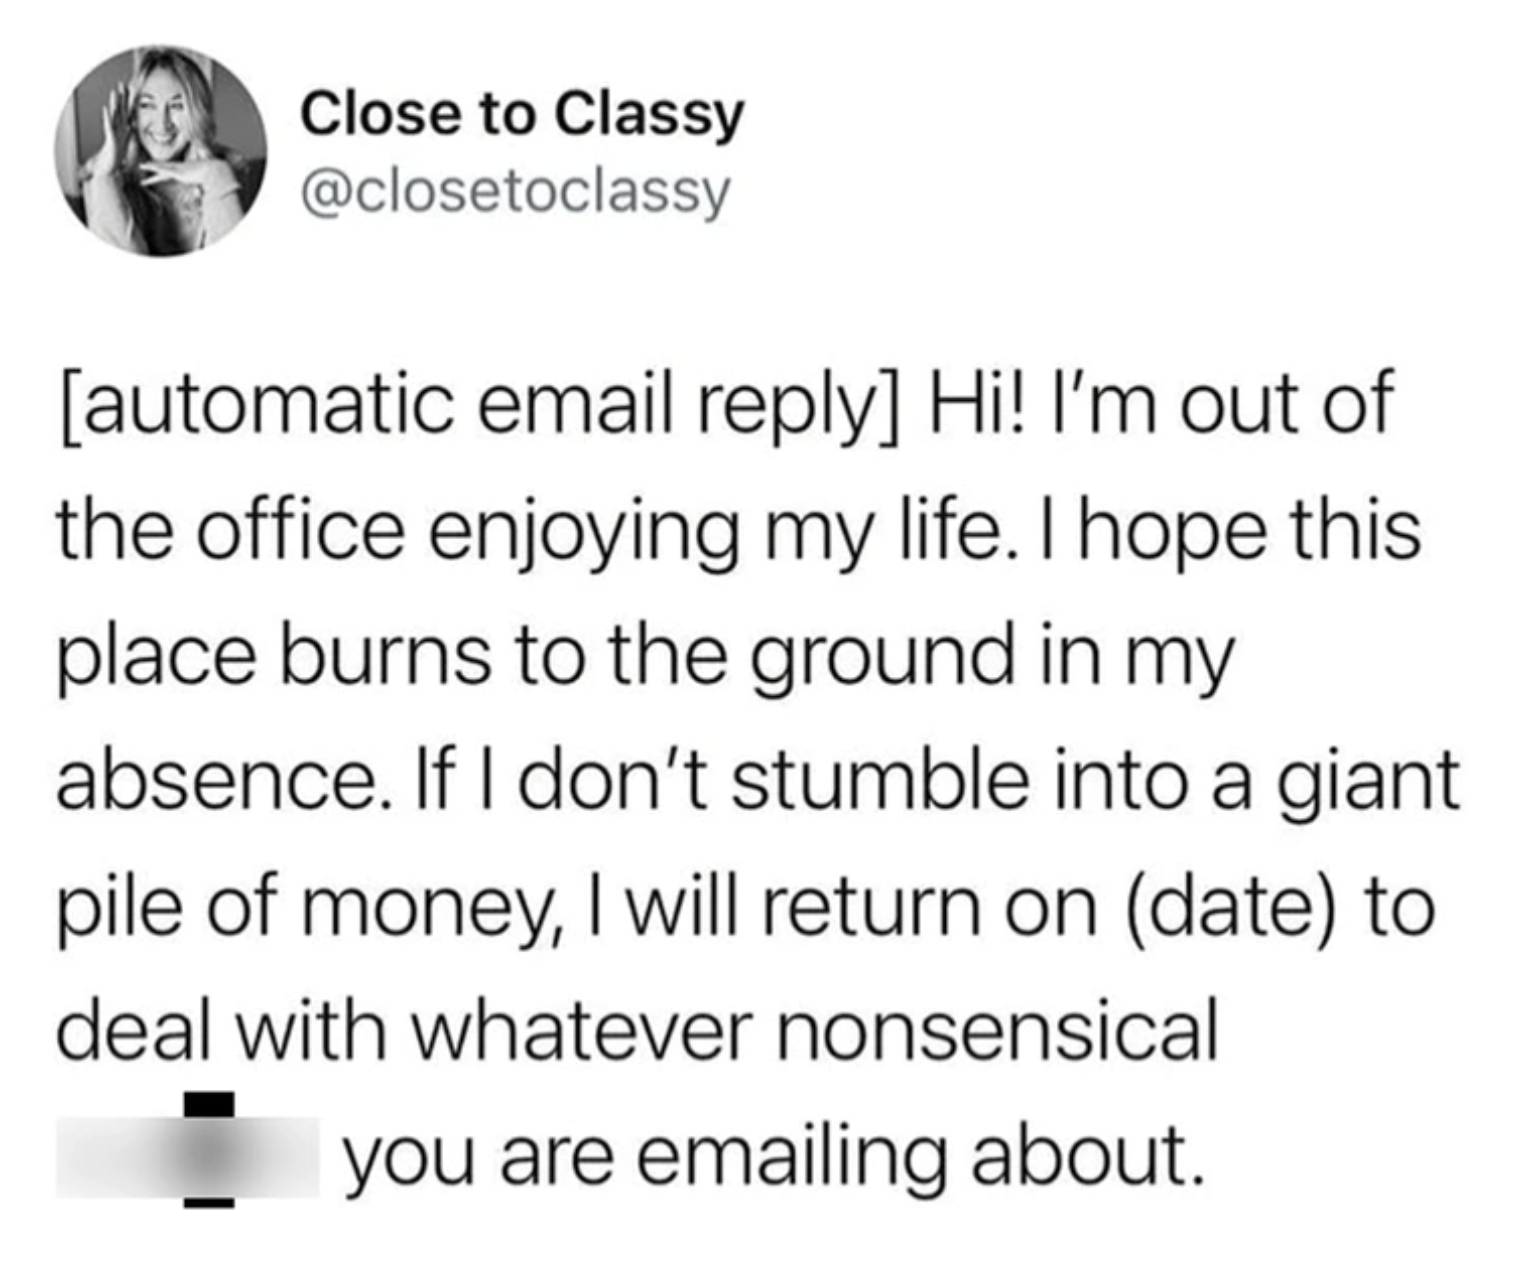 circle - Close to Classy automatic email Hi! I'm out of the office enjoying my life. I hope this place burns to the ground in my absence. If I don't stumble into a giant pile of money, I will return on date to deal with whatever nonsensical you are emaili